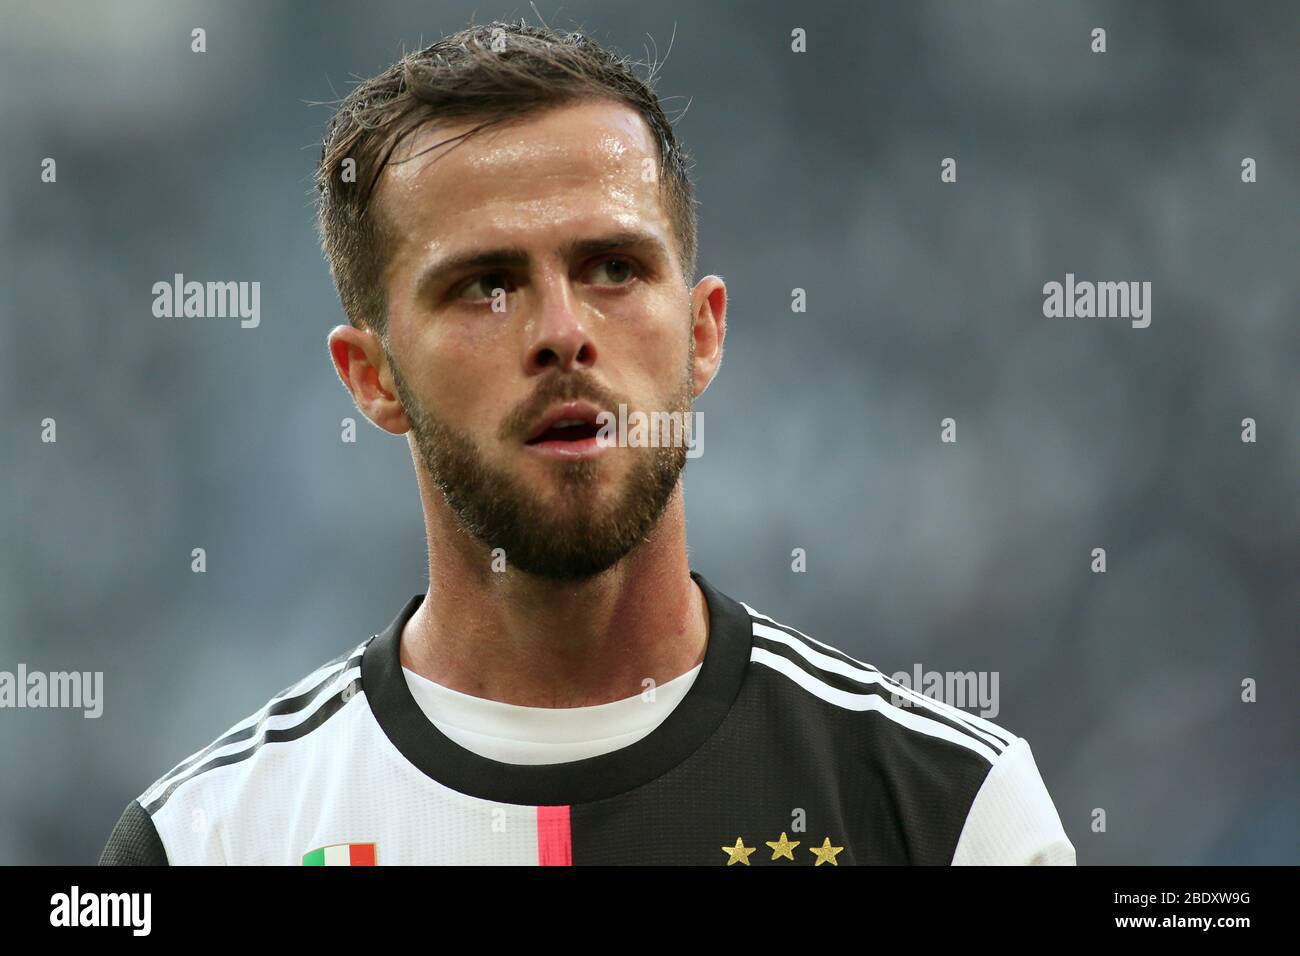 January 1, 2020, Turin, Italy: Turin, Italy, , 01 Jan 2020, 5 Miralem Pjanic during  -  - Credit: LM/Claudio Benedetto (Credit Image: © Claudio Benedetto/LPS via ZUMA Wire) Stock Photo